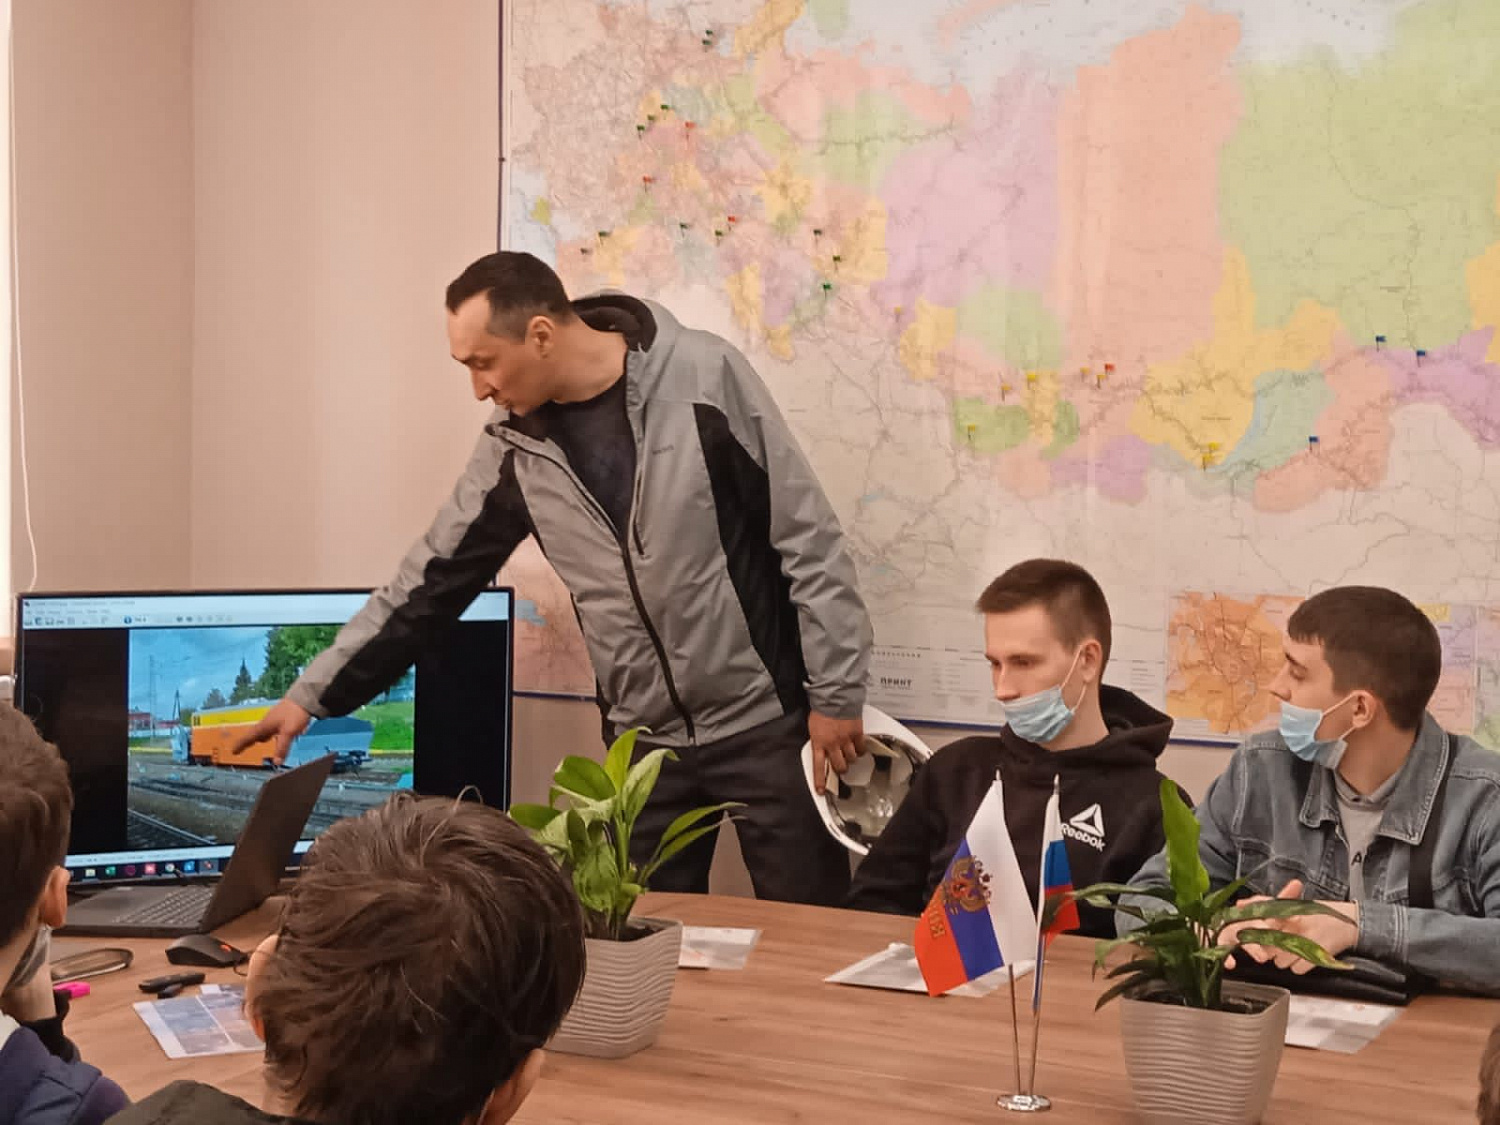 On April 13 and 14, 2022, an open day was held on the territory of the Ulyanovsk branch for graduates of the railway technical school.